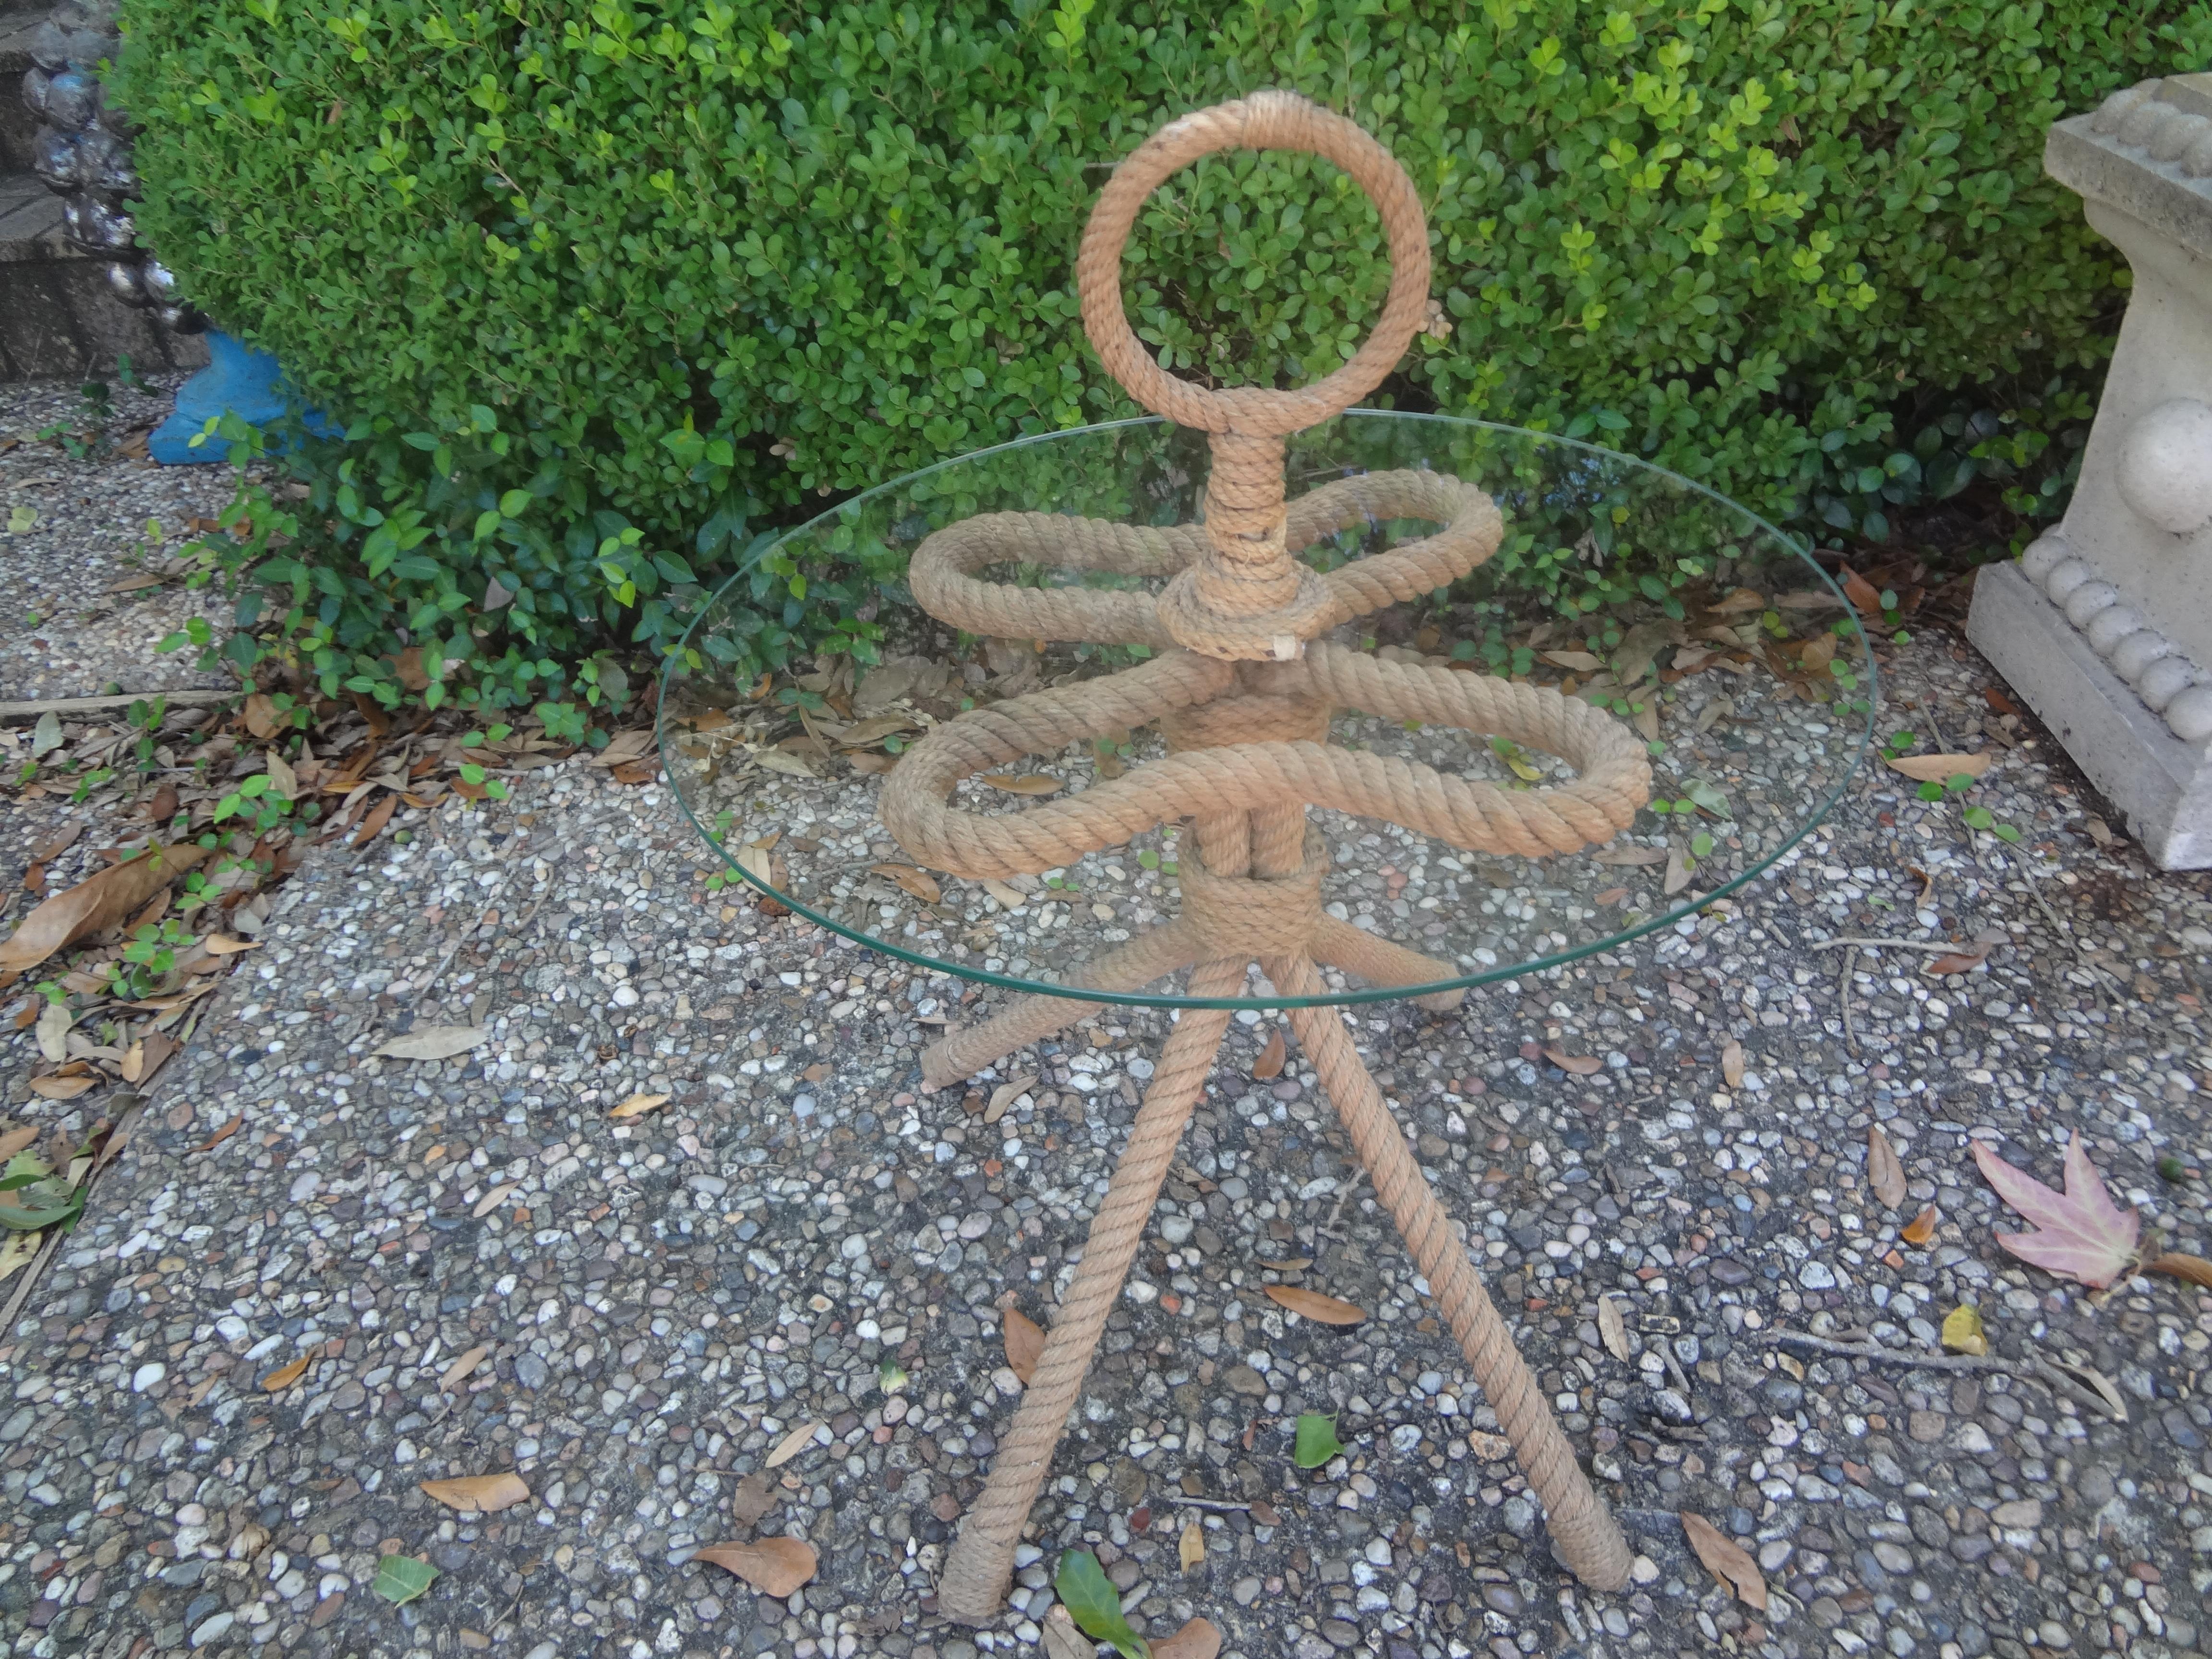 French Audoux & Minet Rope And Glass Table.
This handsome French rope table or gueridon by Adrien Audoux And Frida Minet was realized in the 1950's with the most unusual design featuring three legs with a glass top and rope handle. Our rare Audoux &